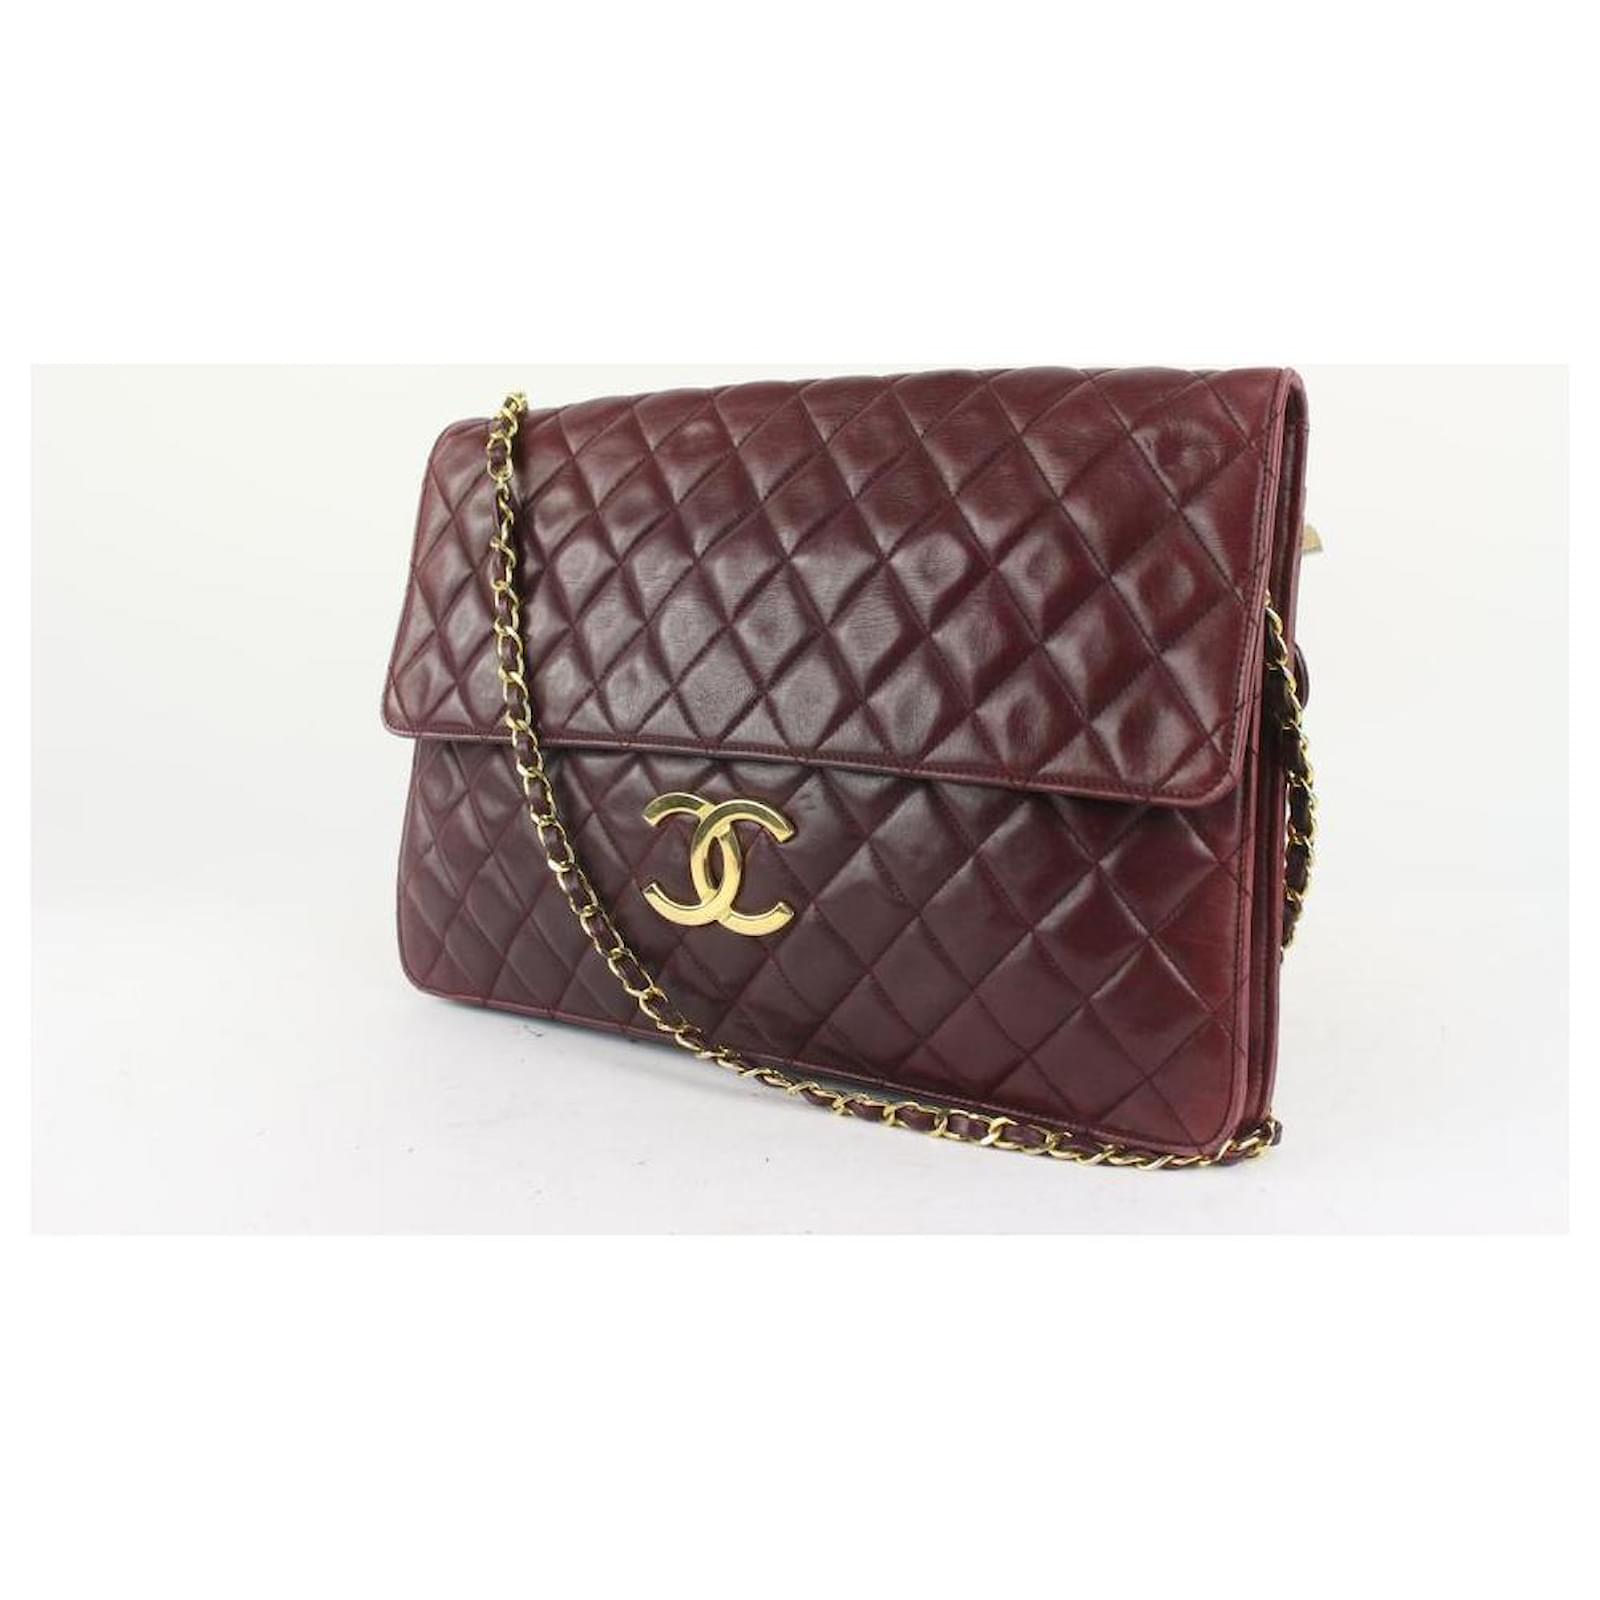 Chanel XL Burgundy Quilted Lambskin Singfle Flap Shoulder Bag